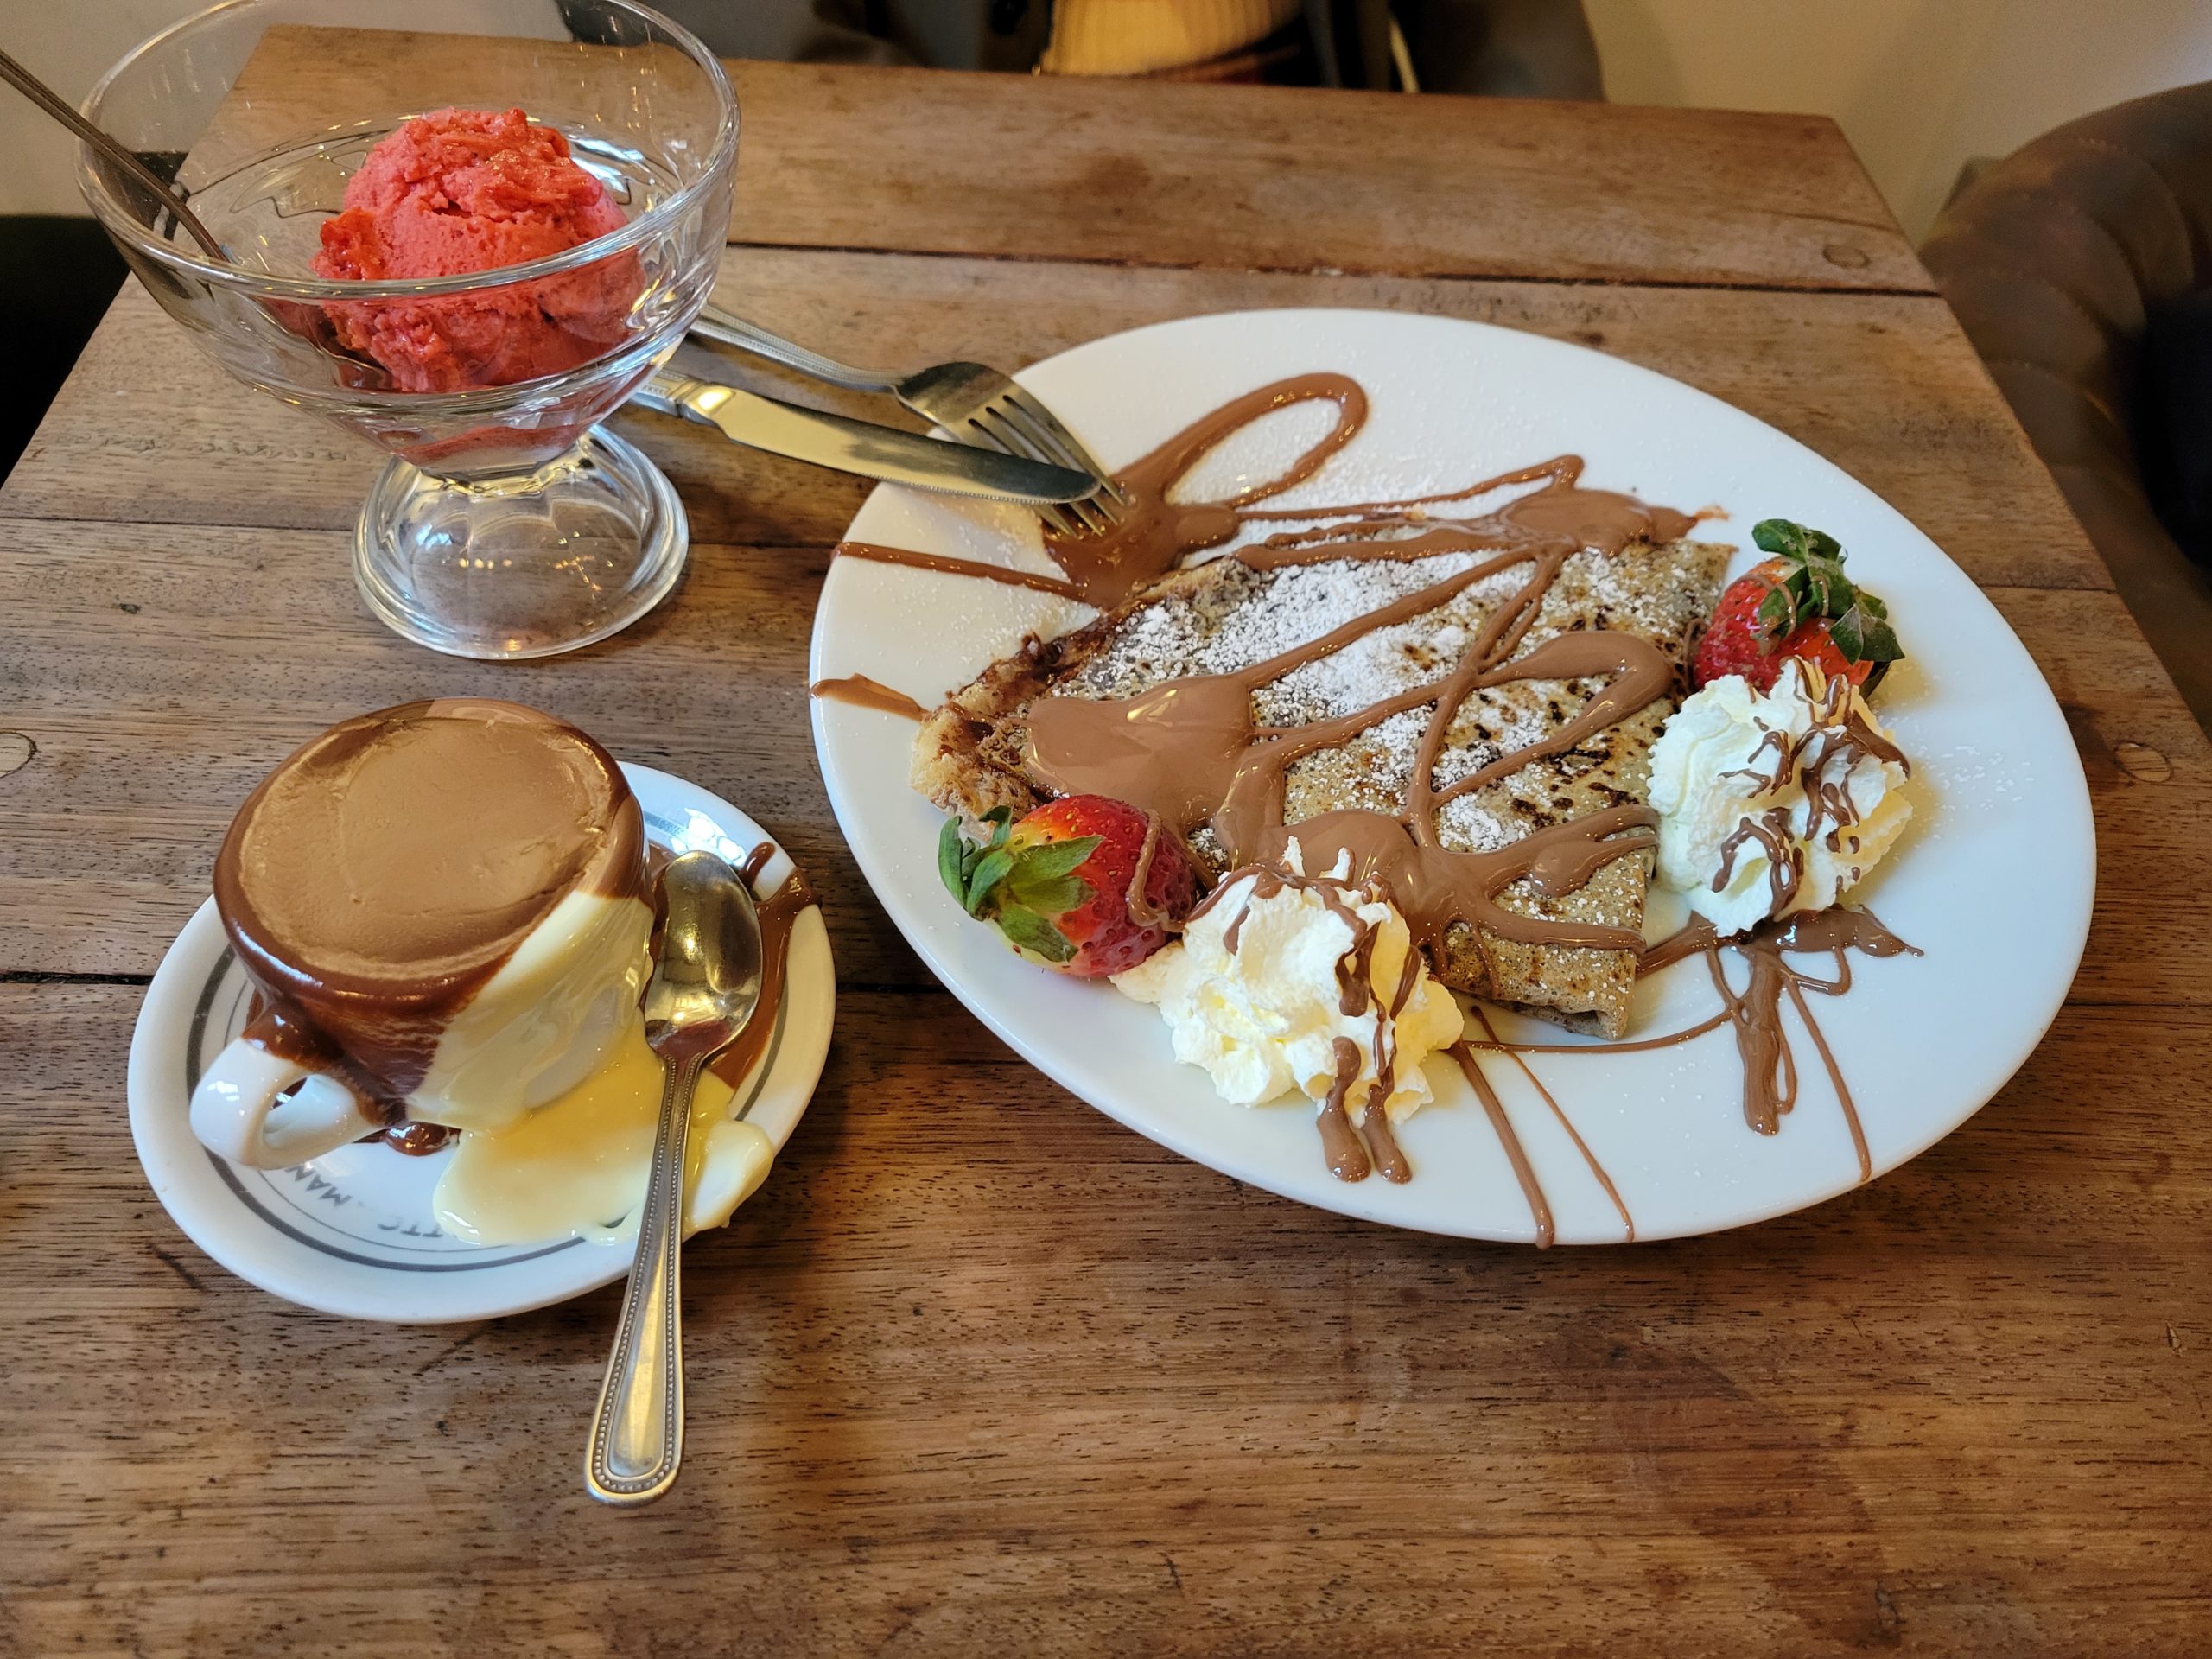 Volunteering, Planning, and the Best Crepe I’ve Ever Had